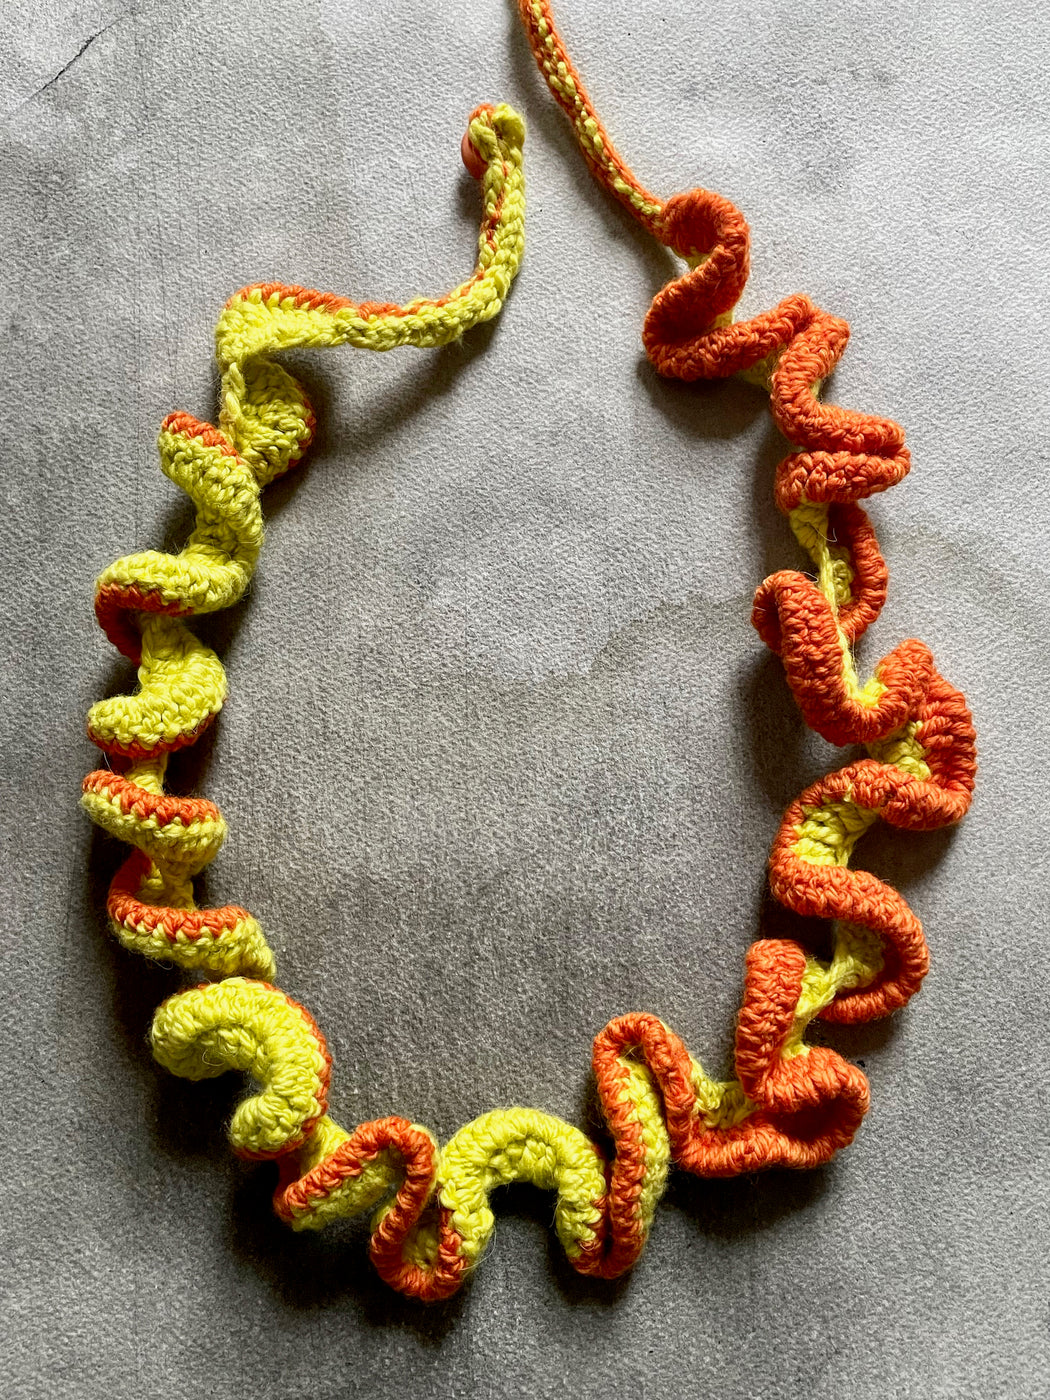 "Ruffle" Hand-Crocheted Necklace by Albo - Daffodil